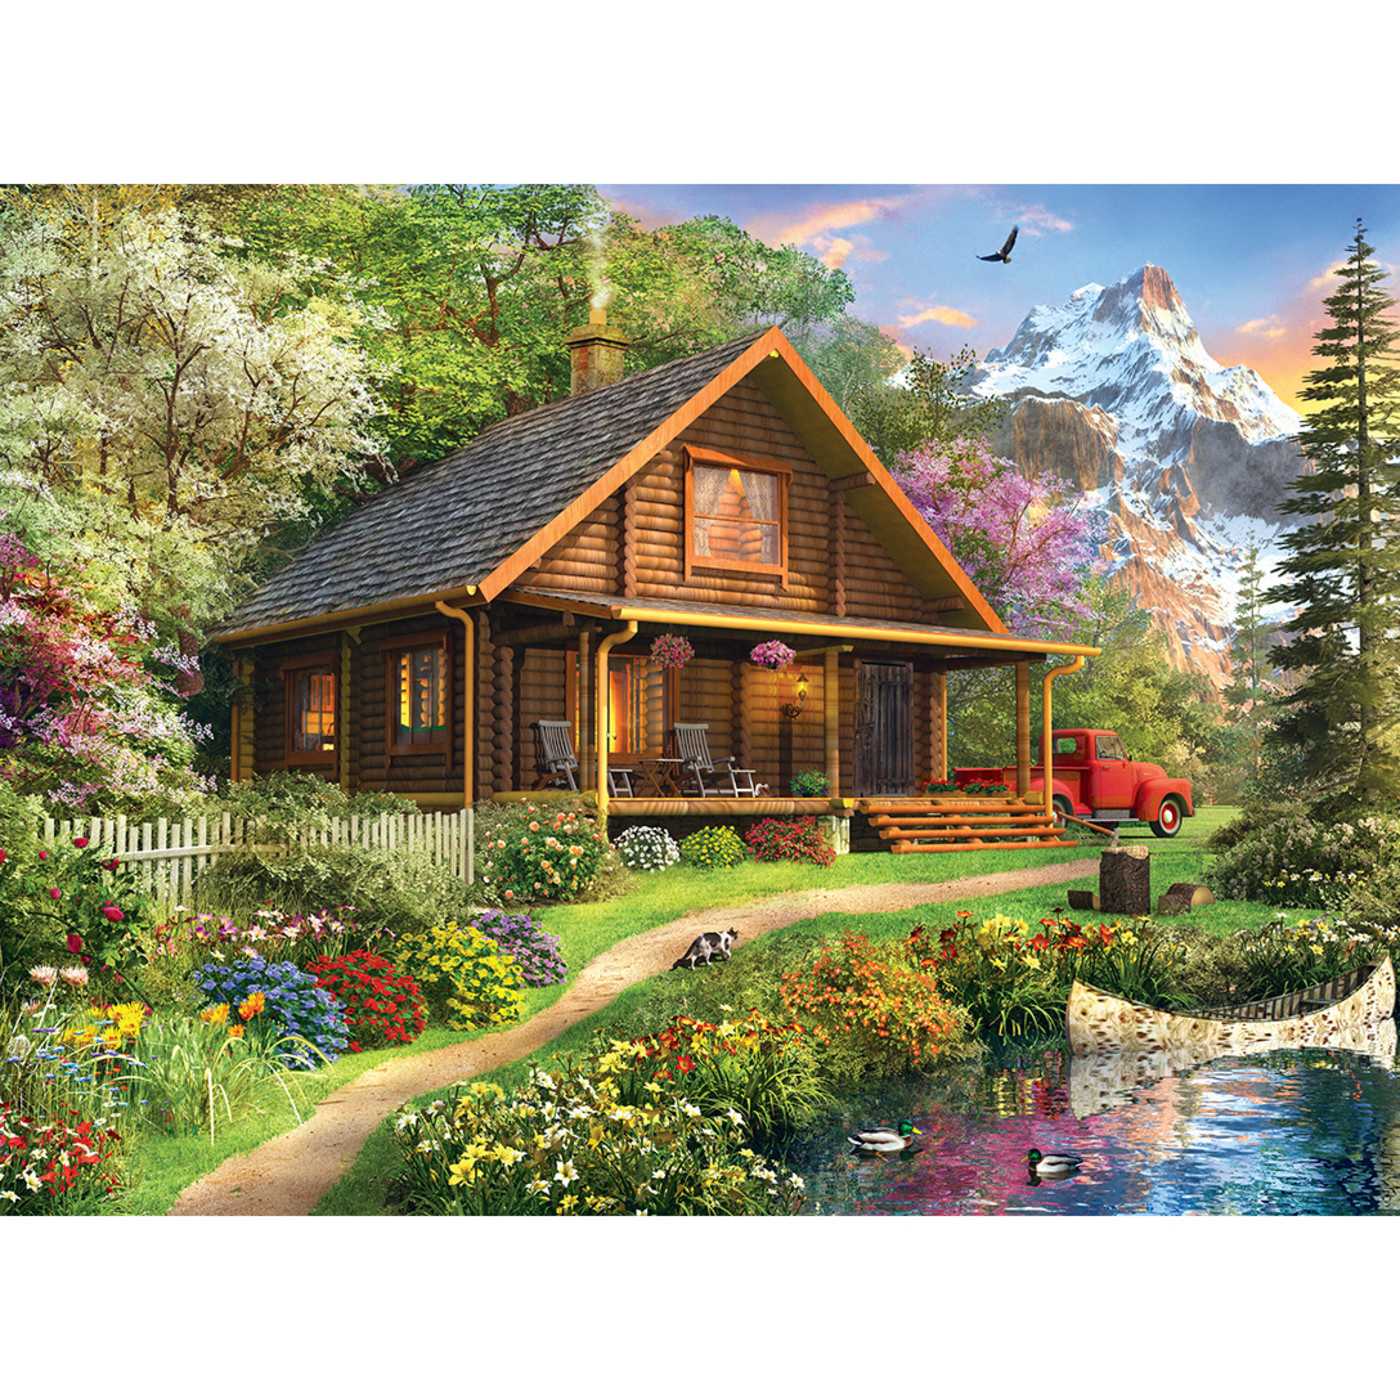 Masterpiece Great Outdoors - Puzzle Assortment 500pc Puzzles